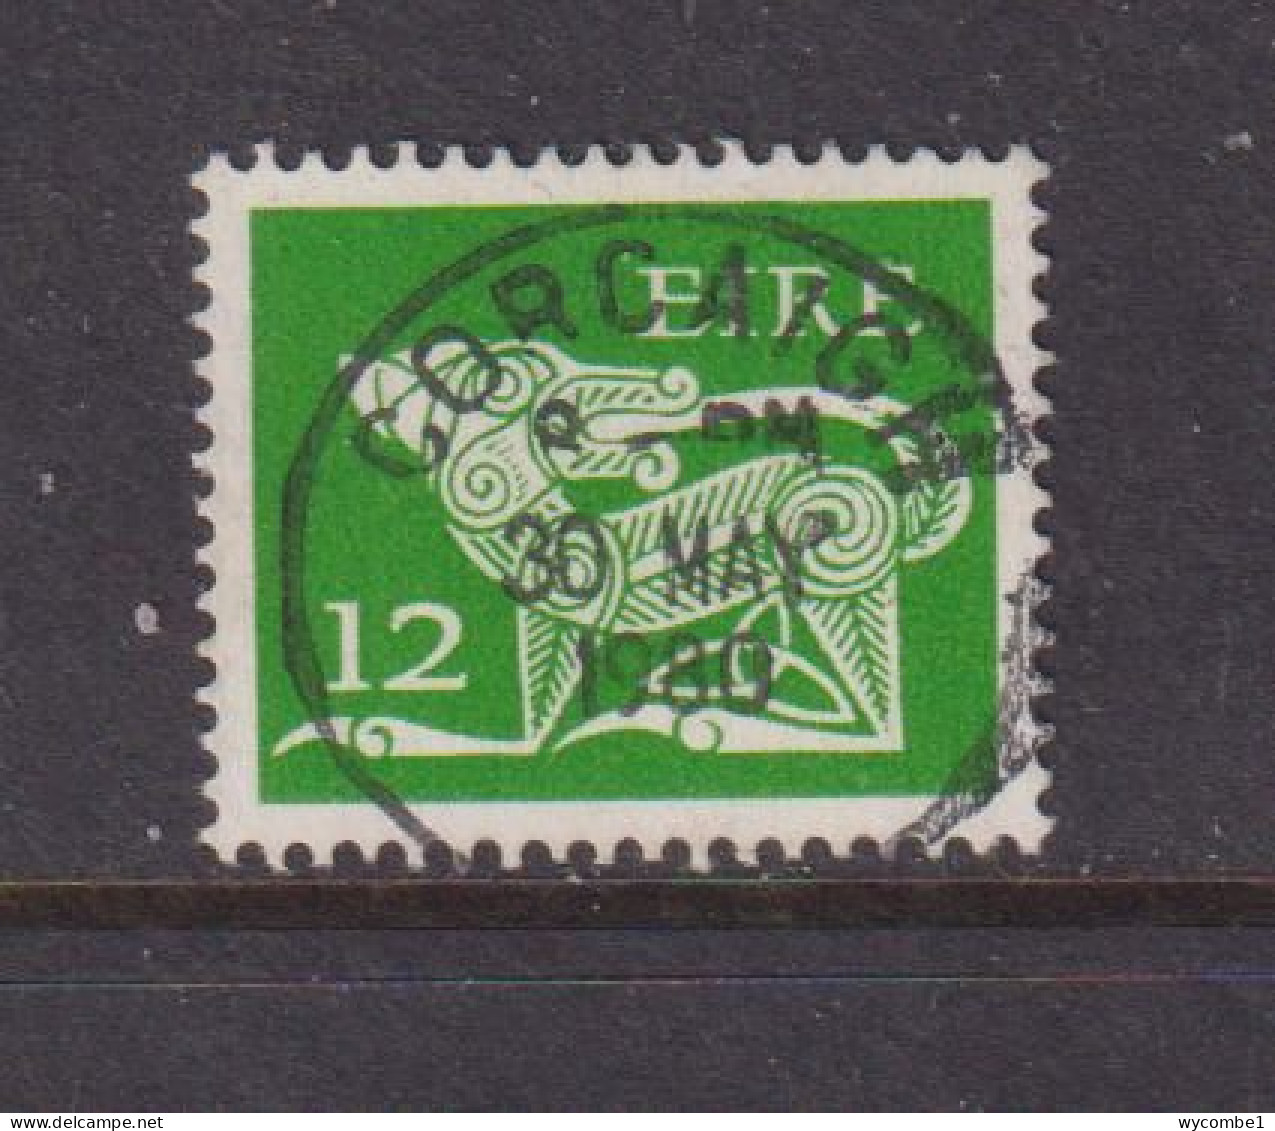 IRELAND - 1971  Decimal Currency Definitives  12p Used As Scan - Used Stamps